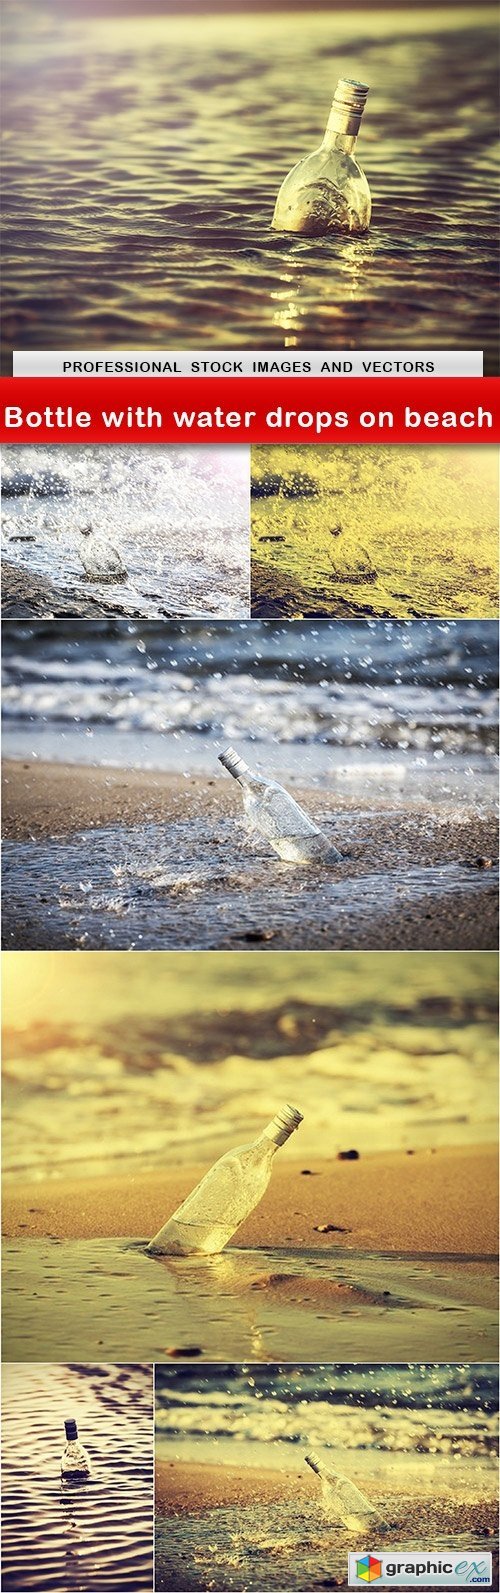 Bottle with water drops on beach - 7 UHQ JPEG